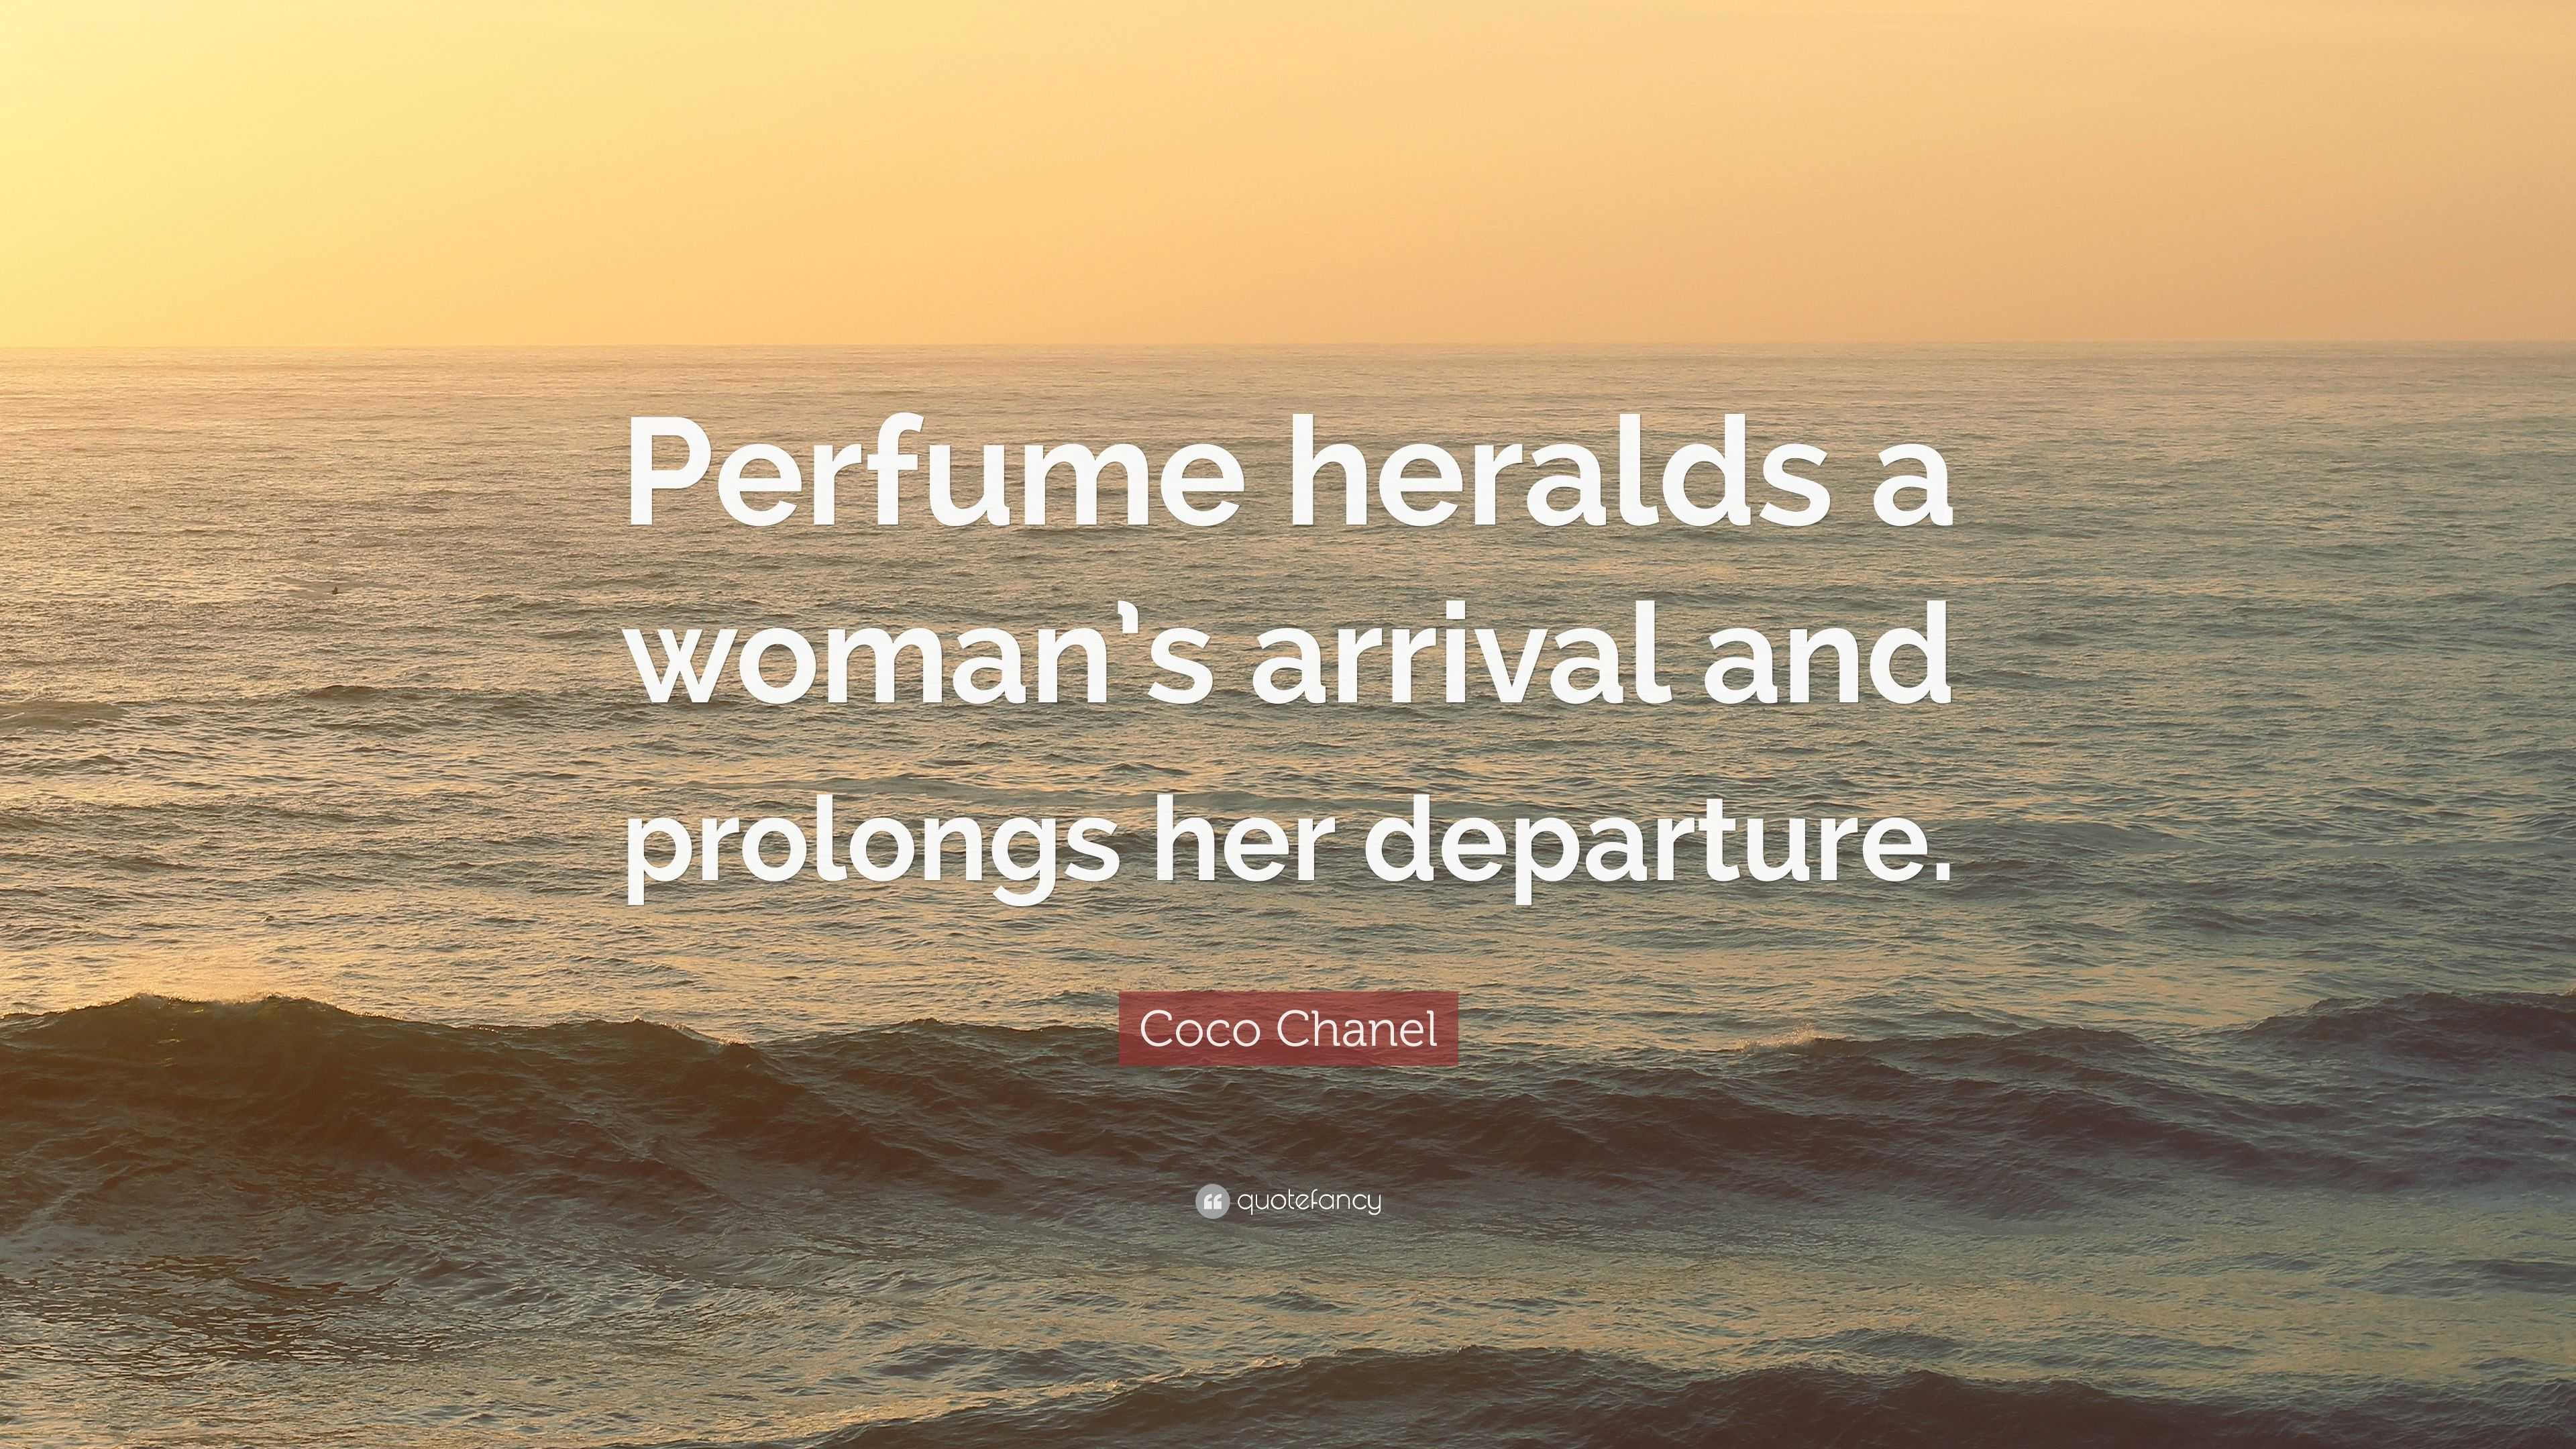 Top 40 Amazing Perfume Quotes With Images By WishesQuotes